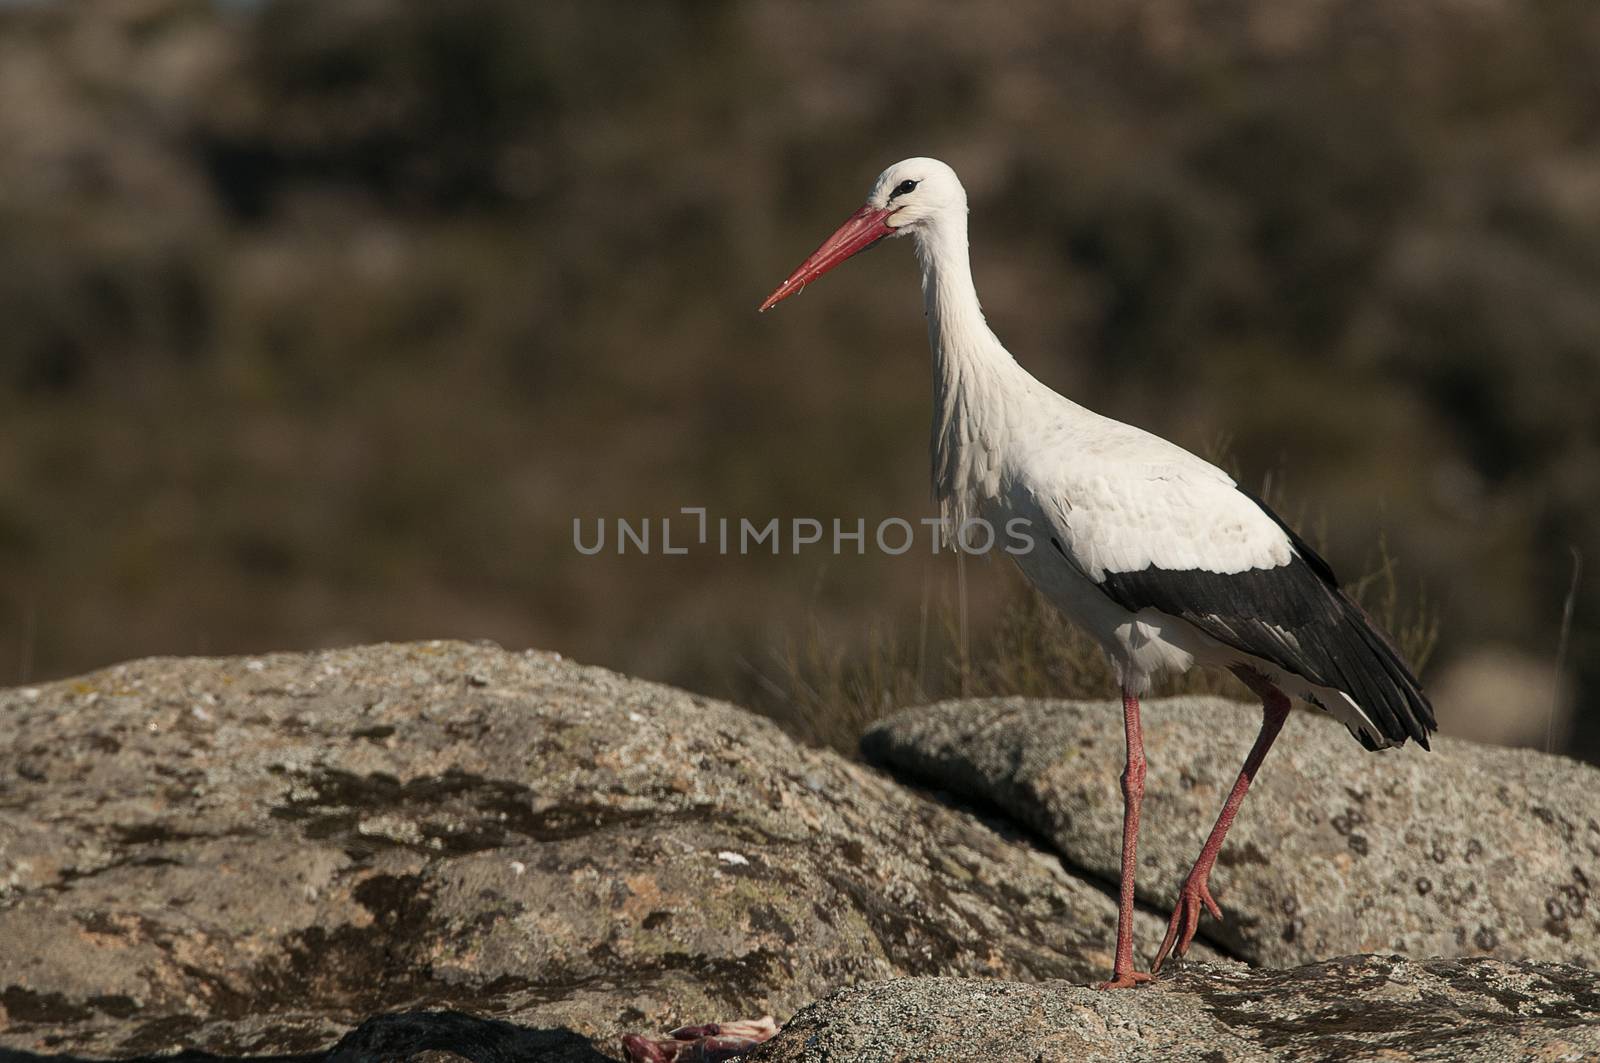 White stork standing on the rocks (Ciconia ciconia)